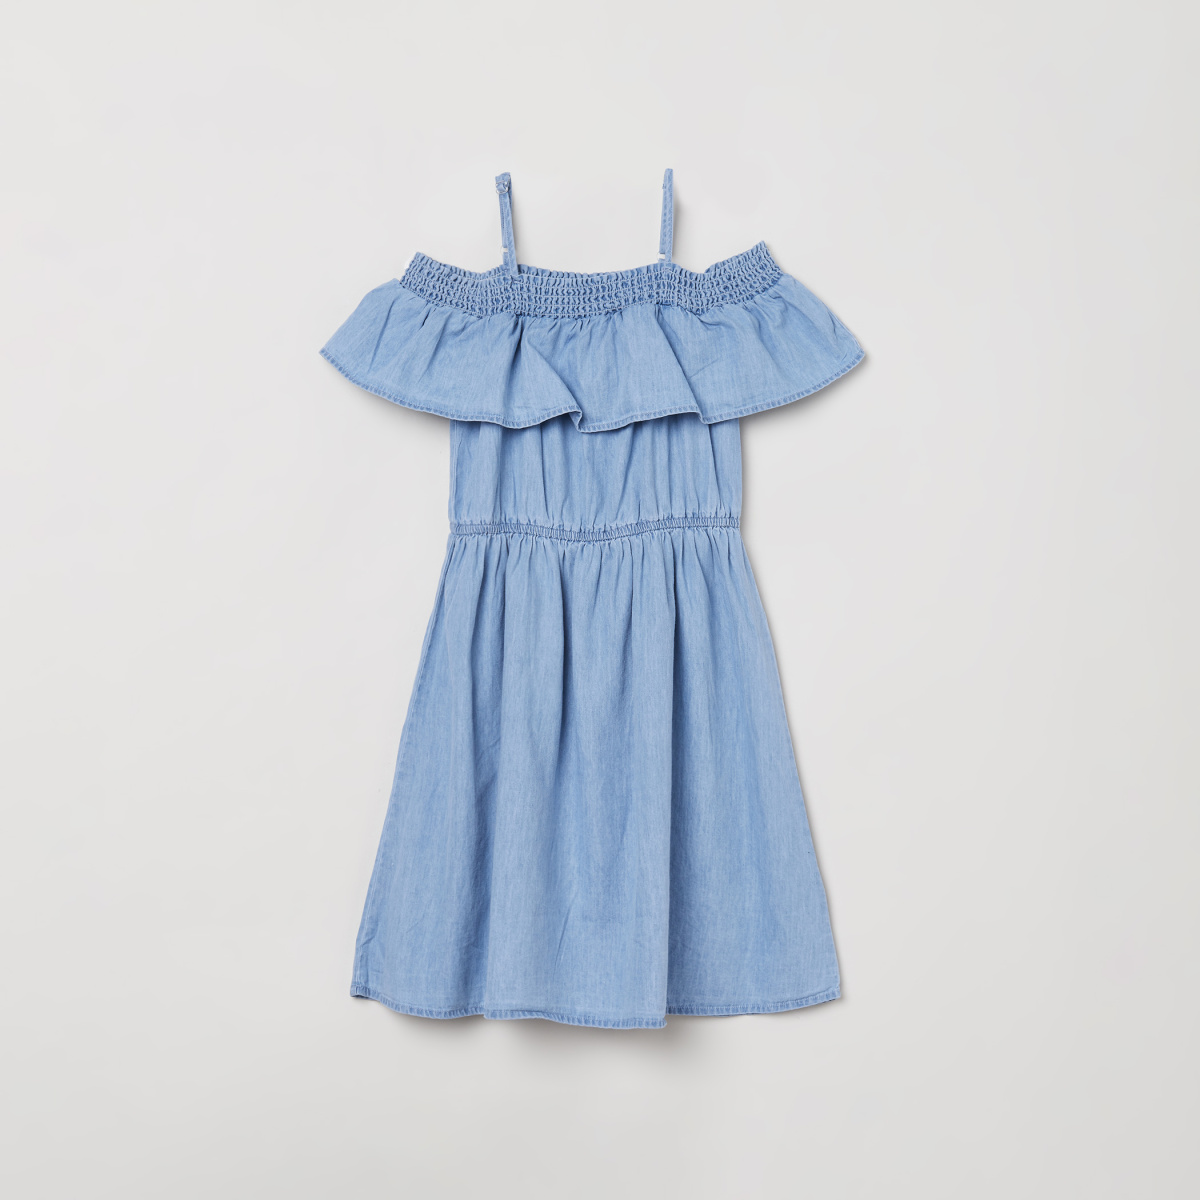 Buy Aeropostale Cold Shoulder Chambray Dress - NNNOW.com